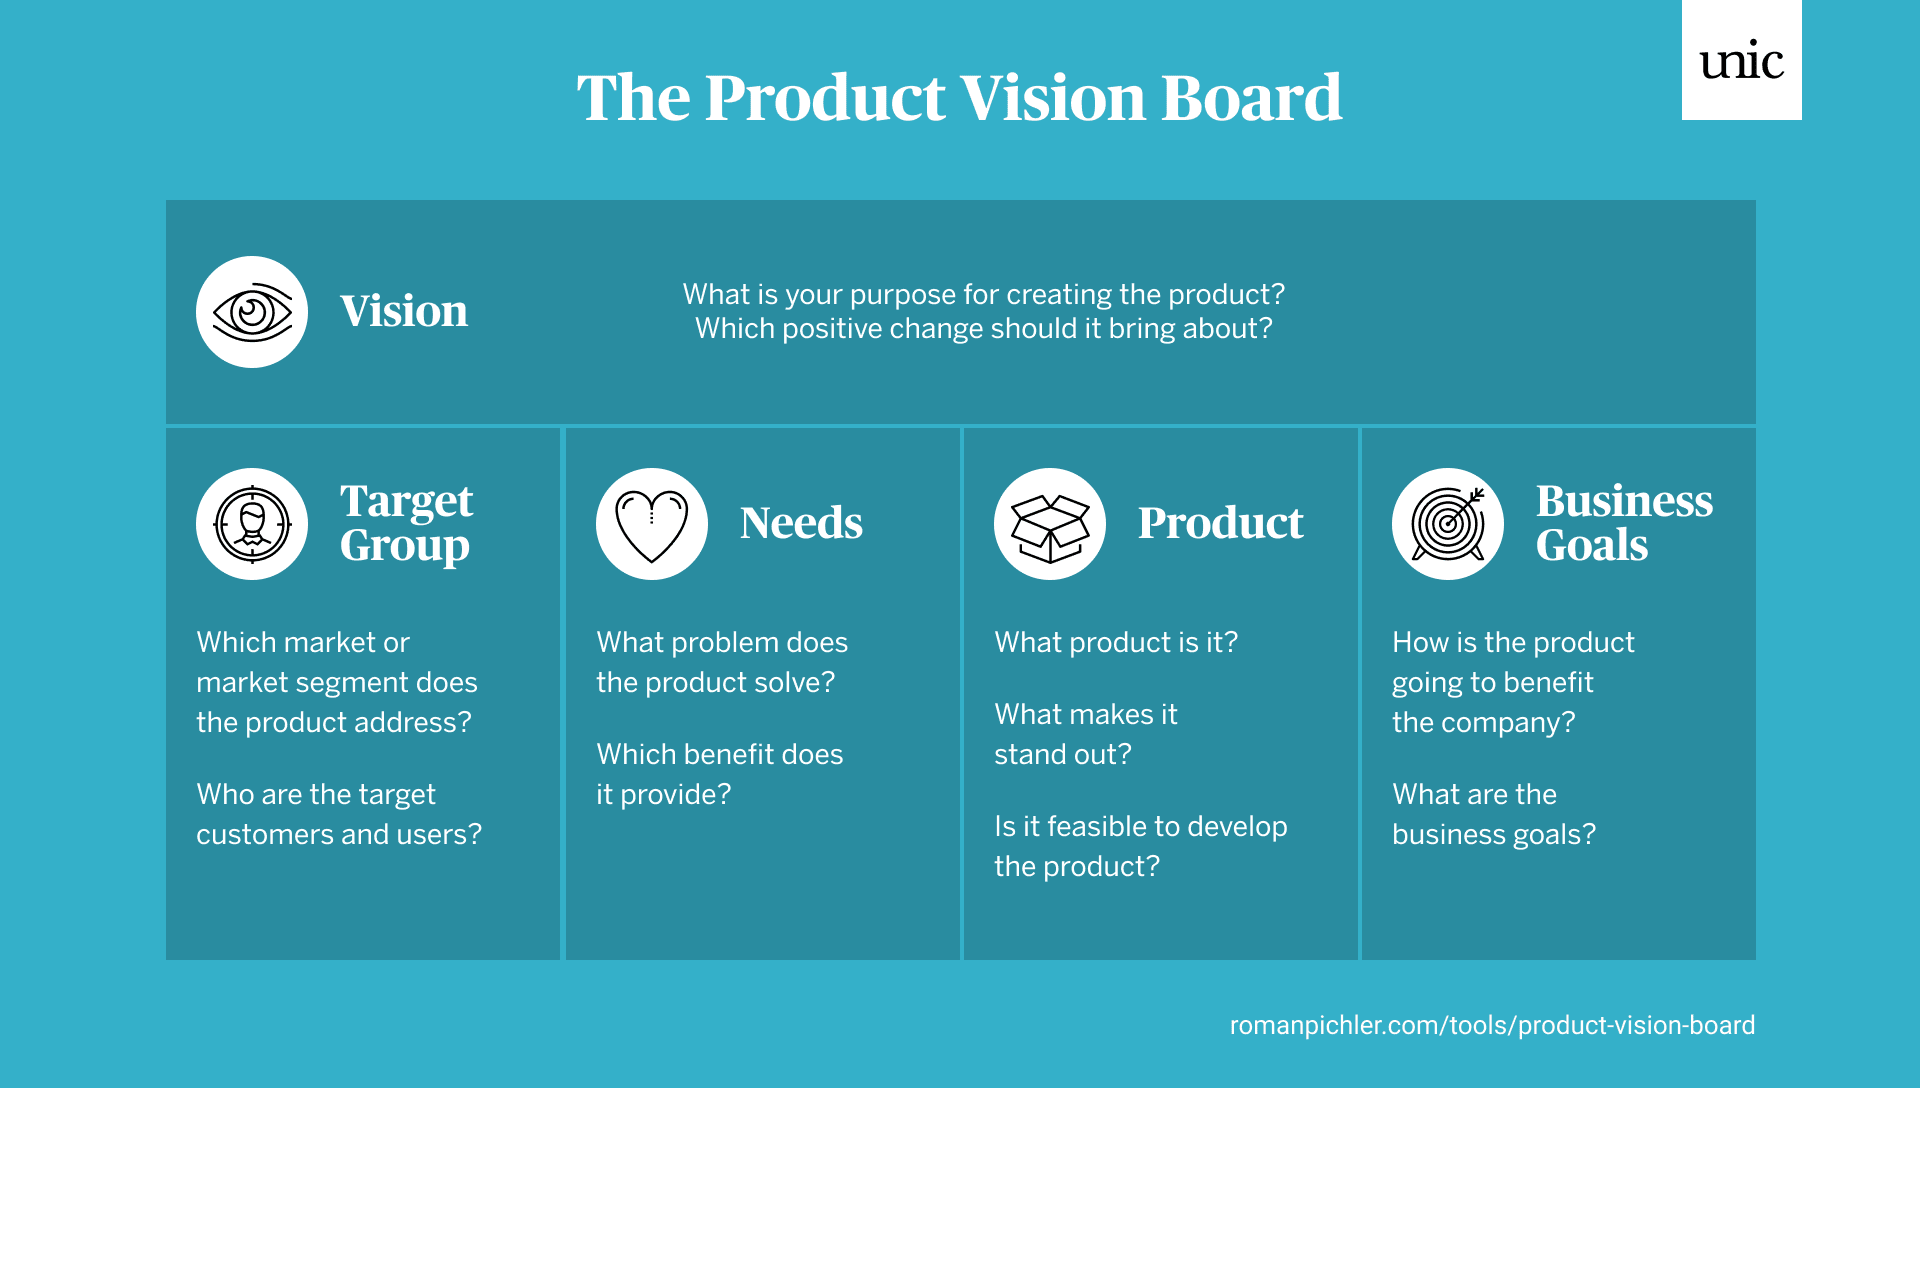 A Guide to Creating a Great Product Vision: Examples and Tips